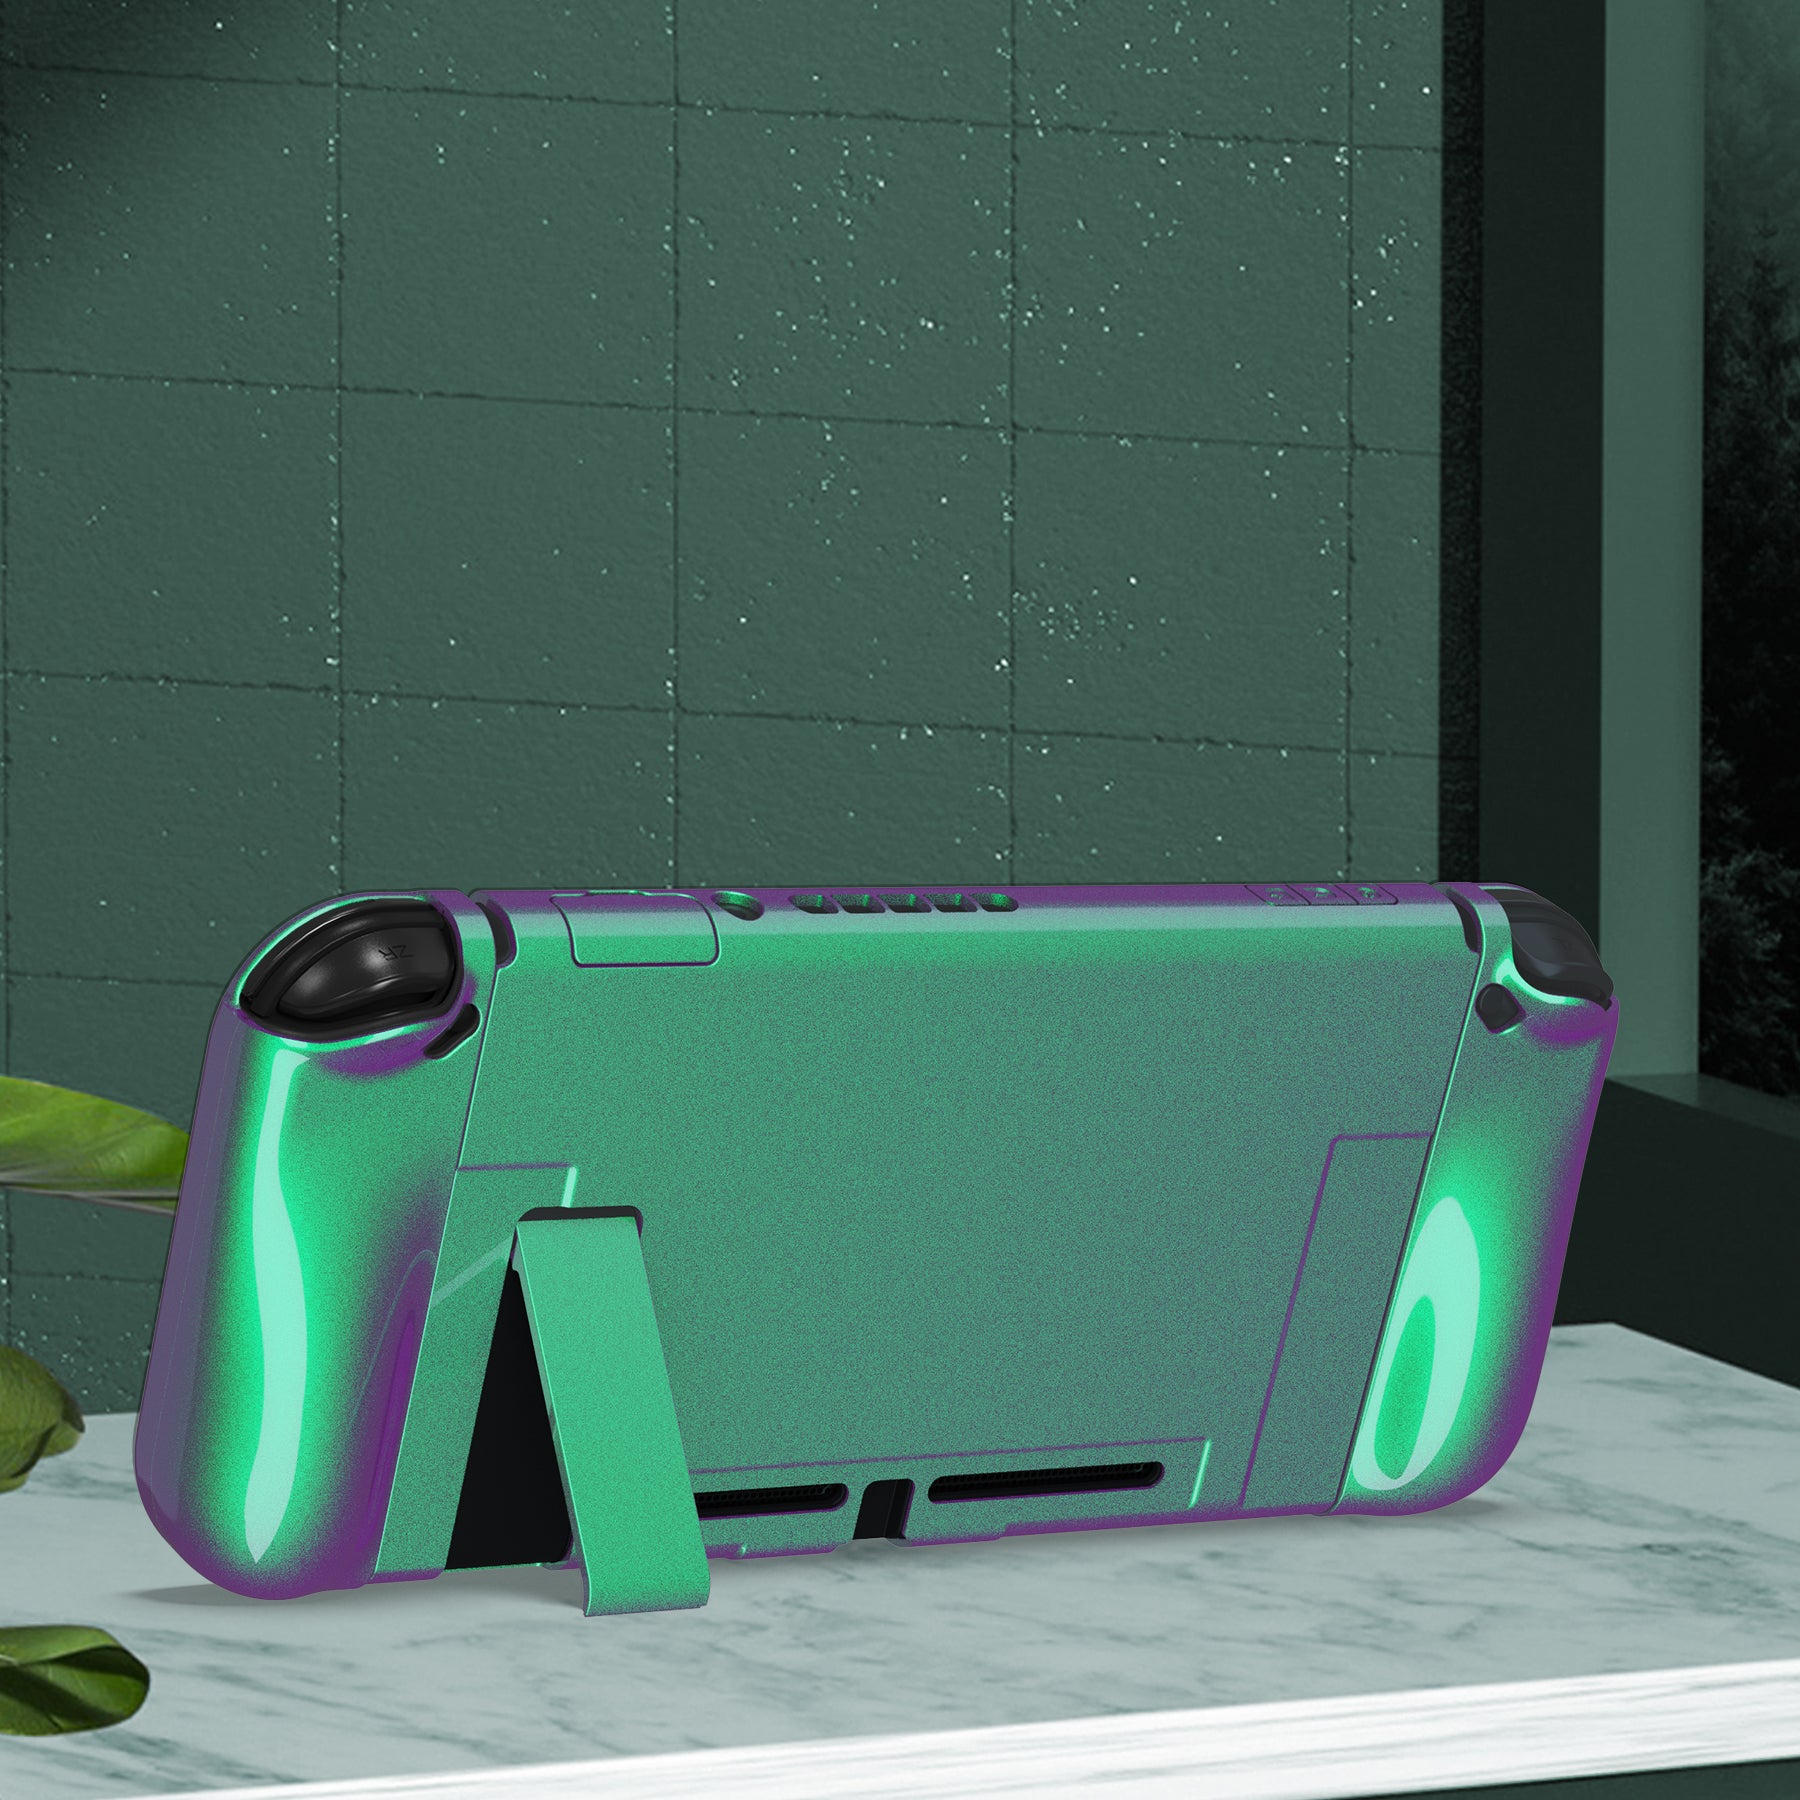 PlayVital AlterGrips Glossy Dockable Protective Case Ergonomic Grip Cover for Nintendo Switch, Interchangeable Joycon Cover w/Screen Protector & Thumb Grip Caps & Button Caps - Chameleon Green Purple - TNSYP3002 playvital